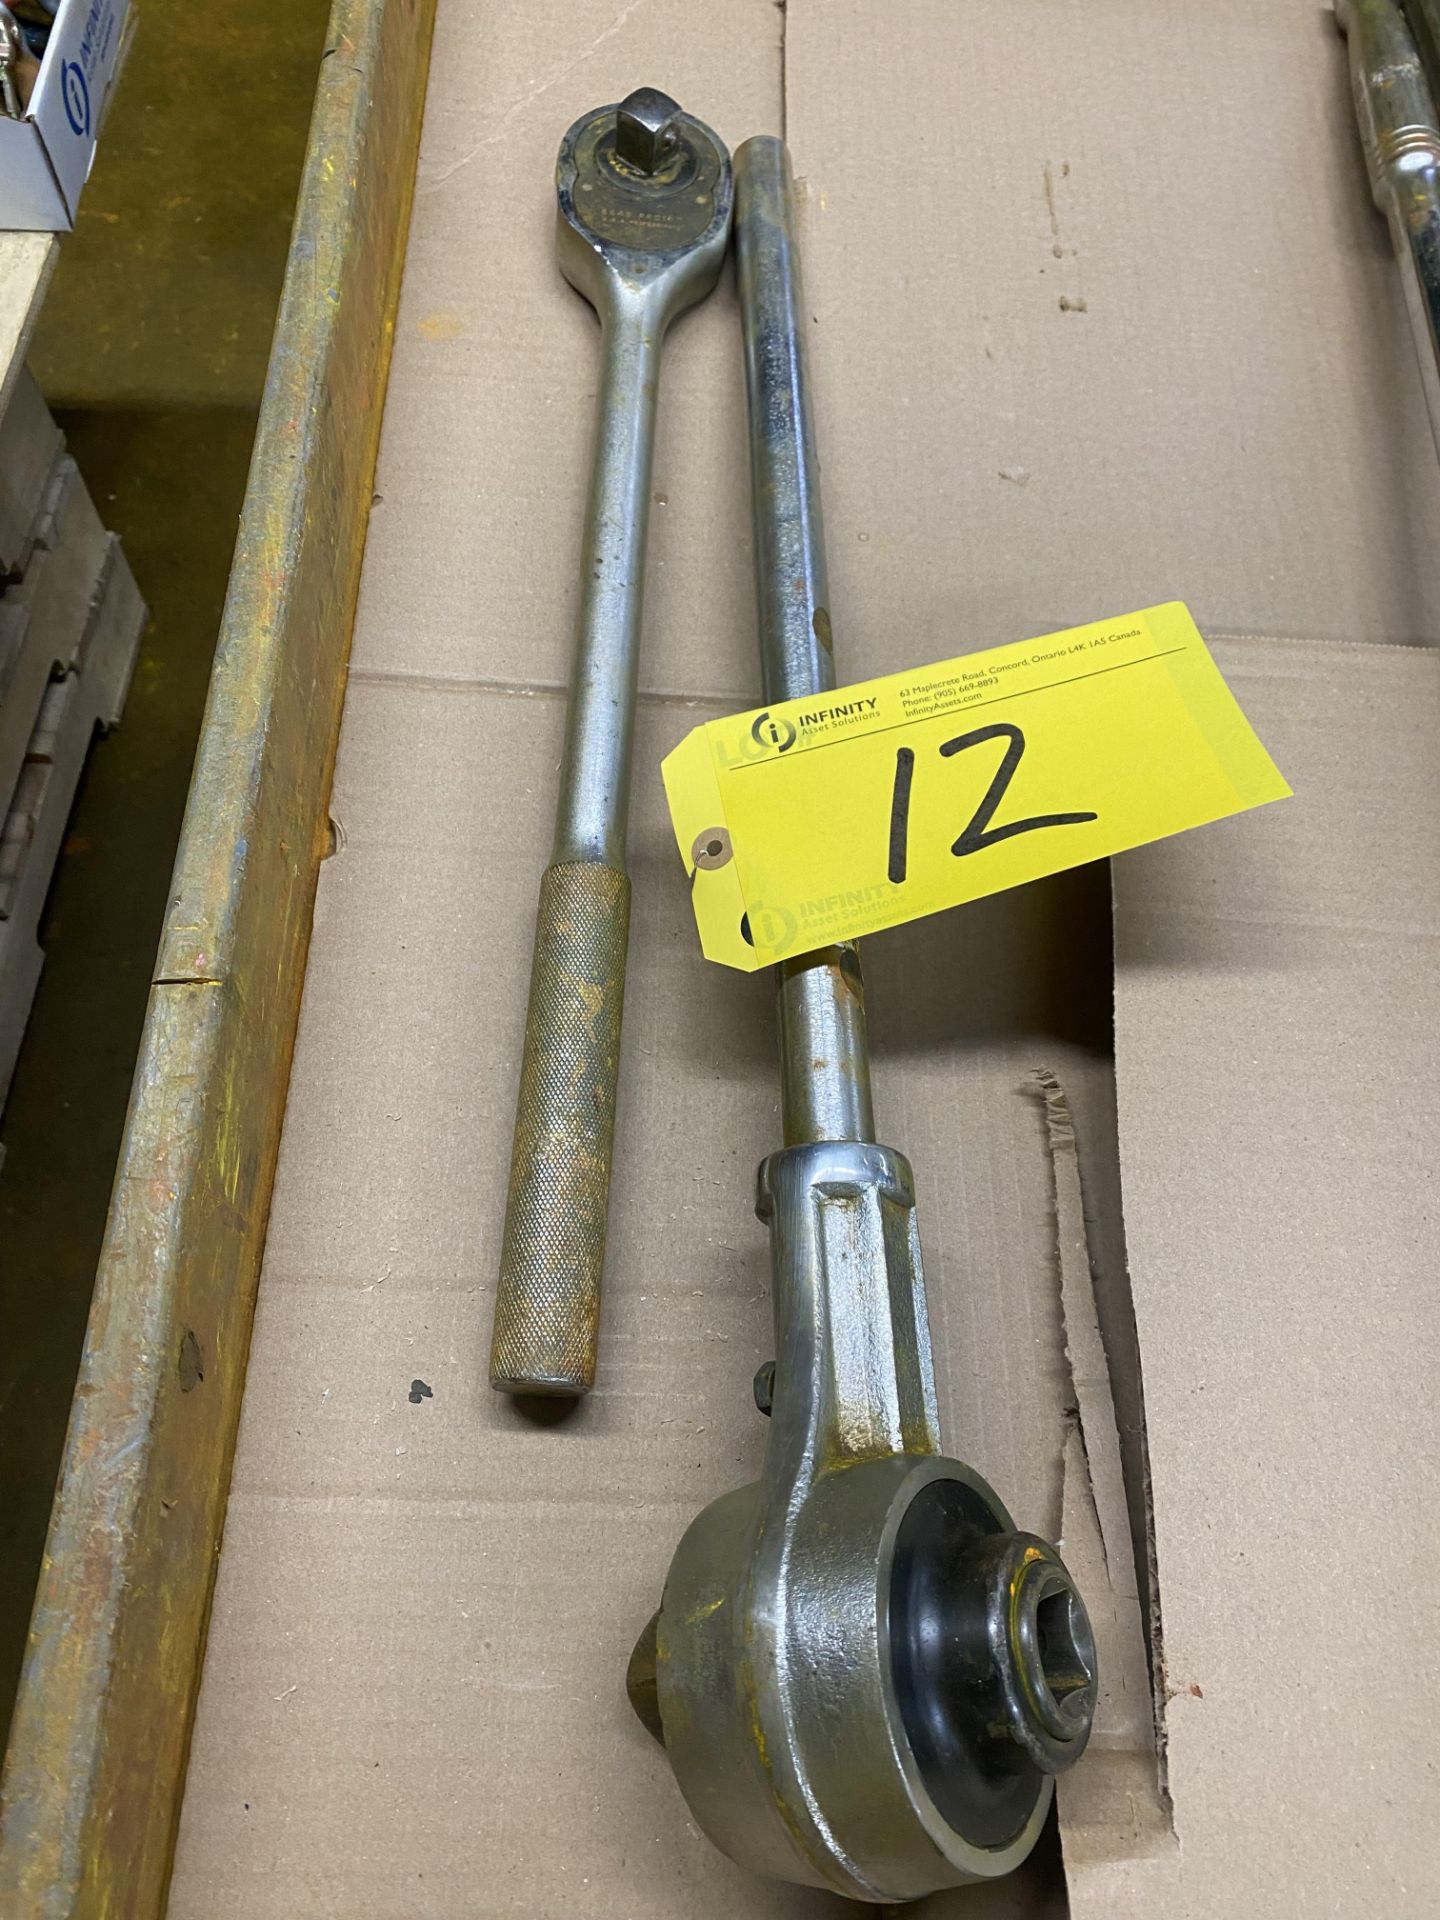 LOT OF (2) TORQUE WRENCHES, 24"L X 1" AND 20"L X 3/4"